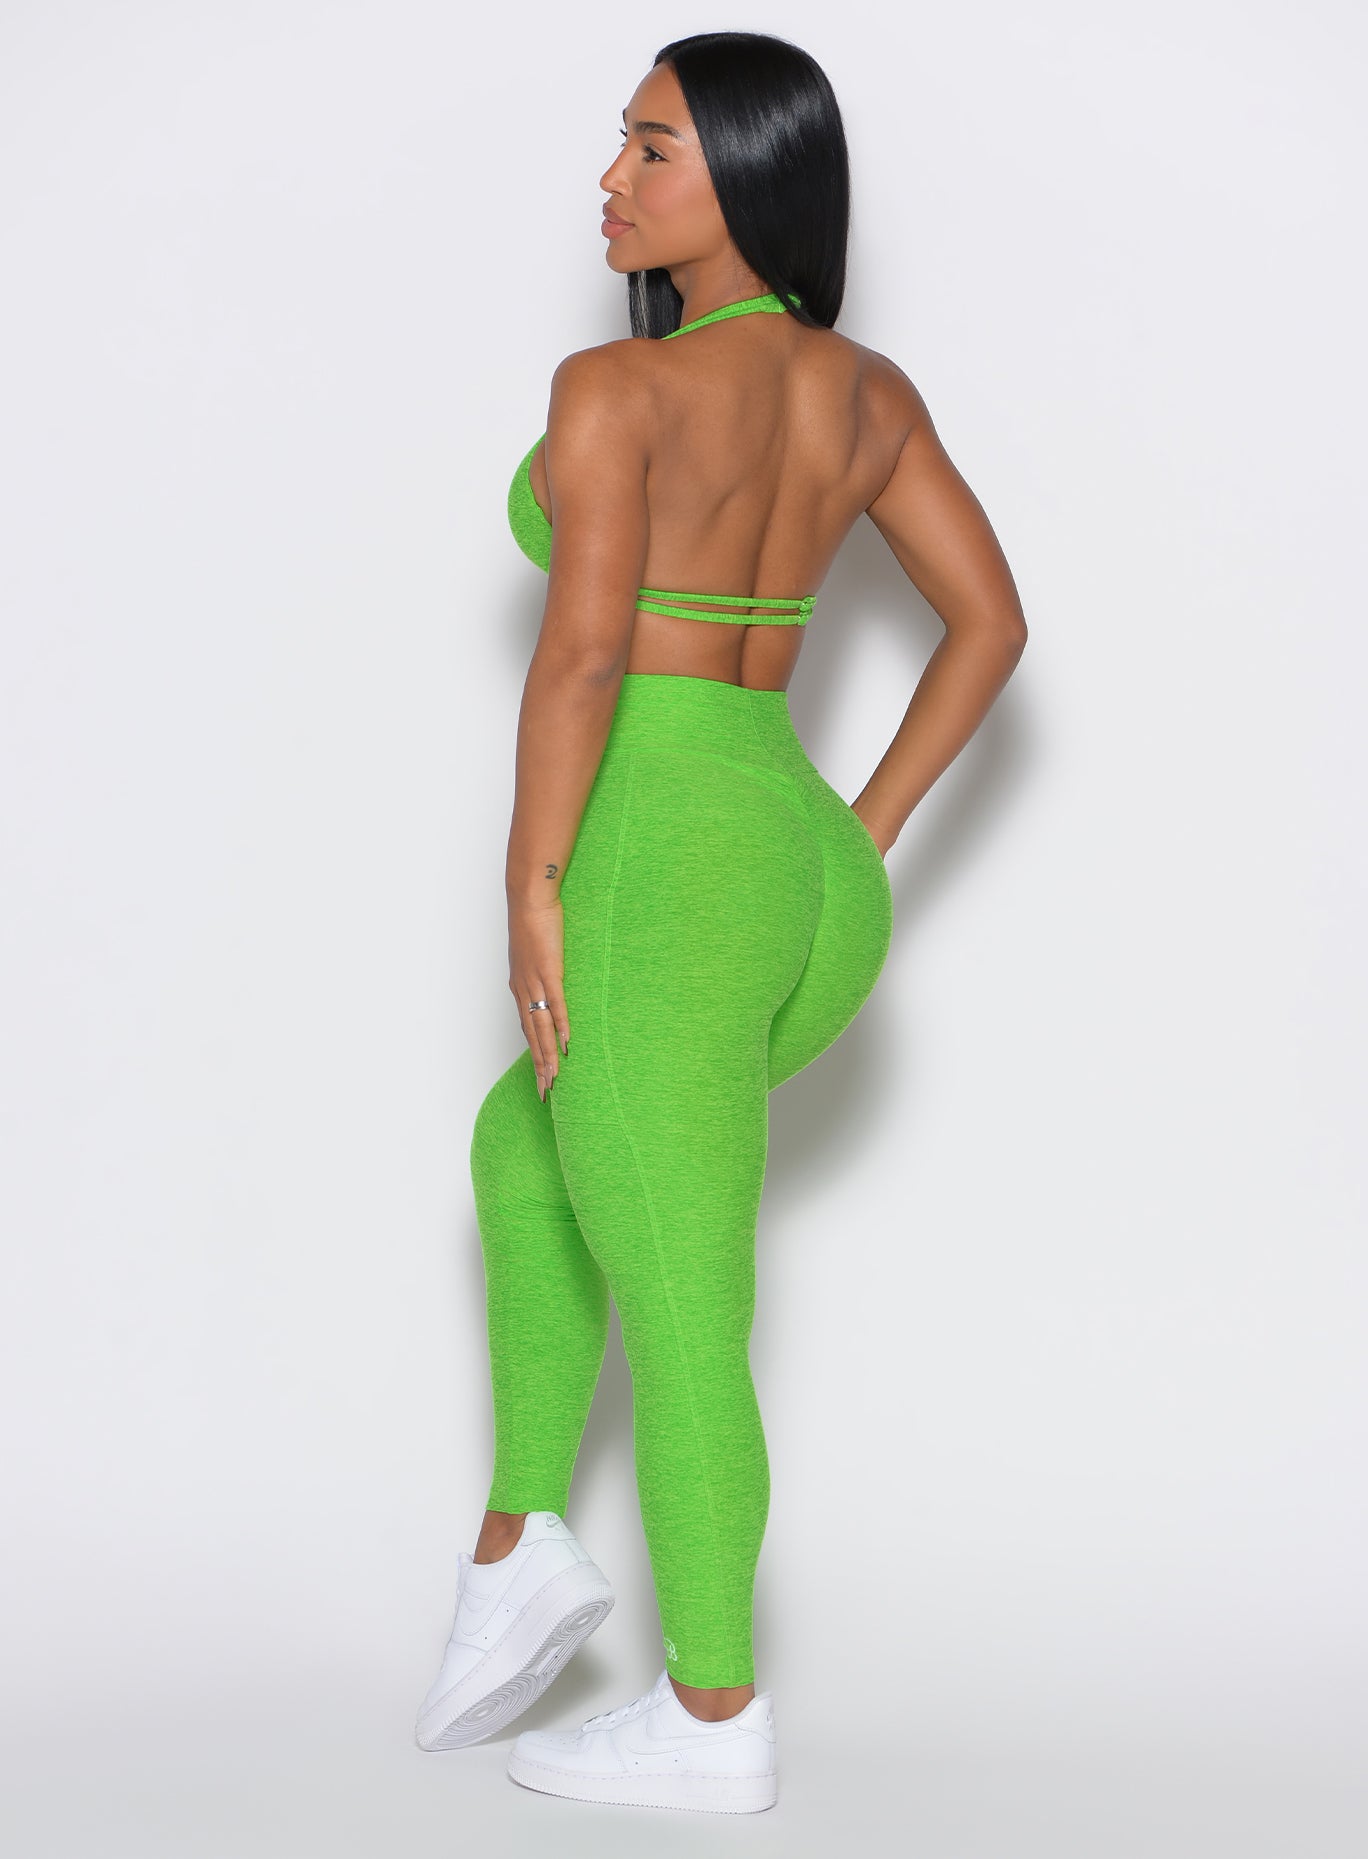 left side profile view of a model facing to her left wearing our curves leggings in Neon Lime Green color along with the matching sports bra